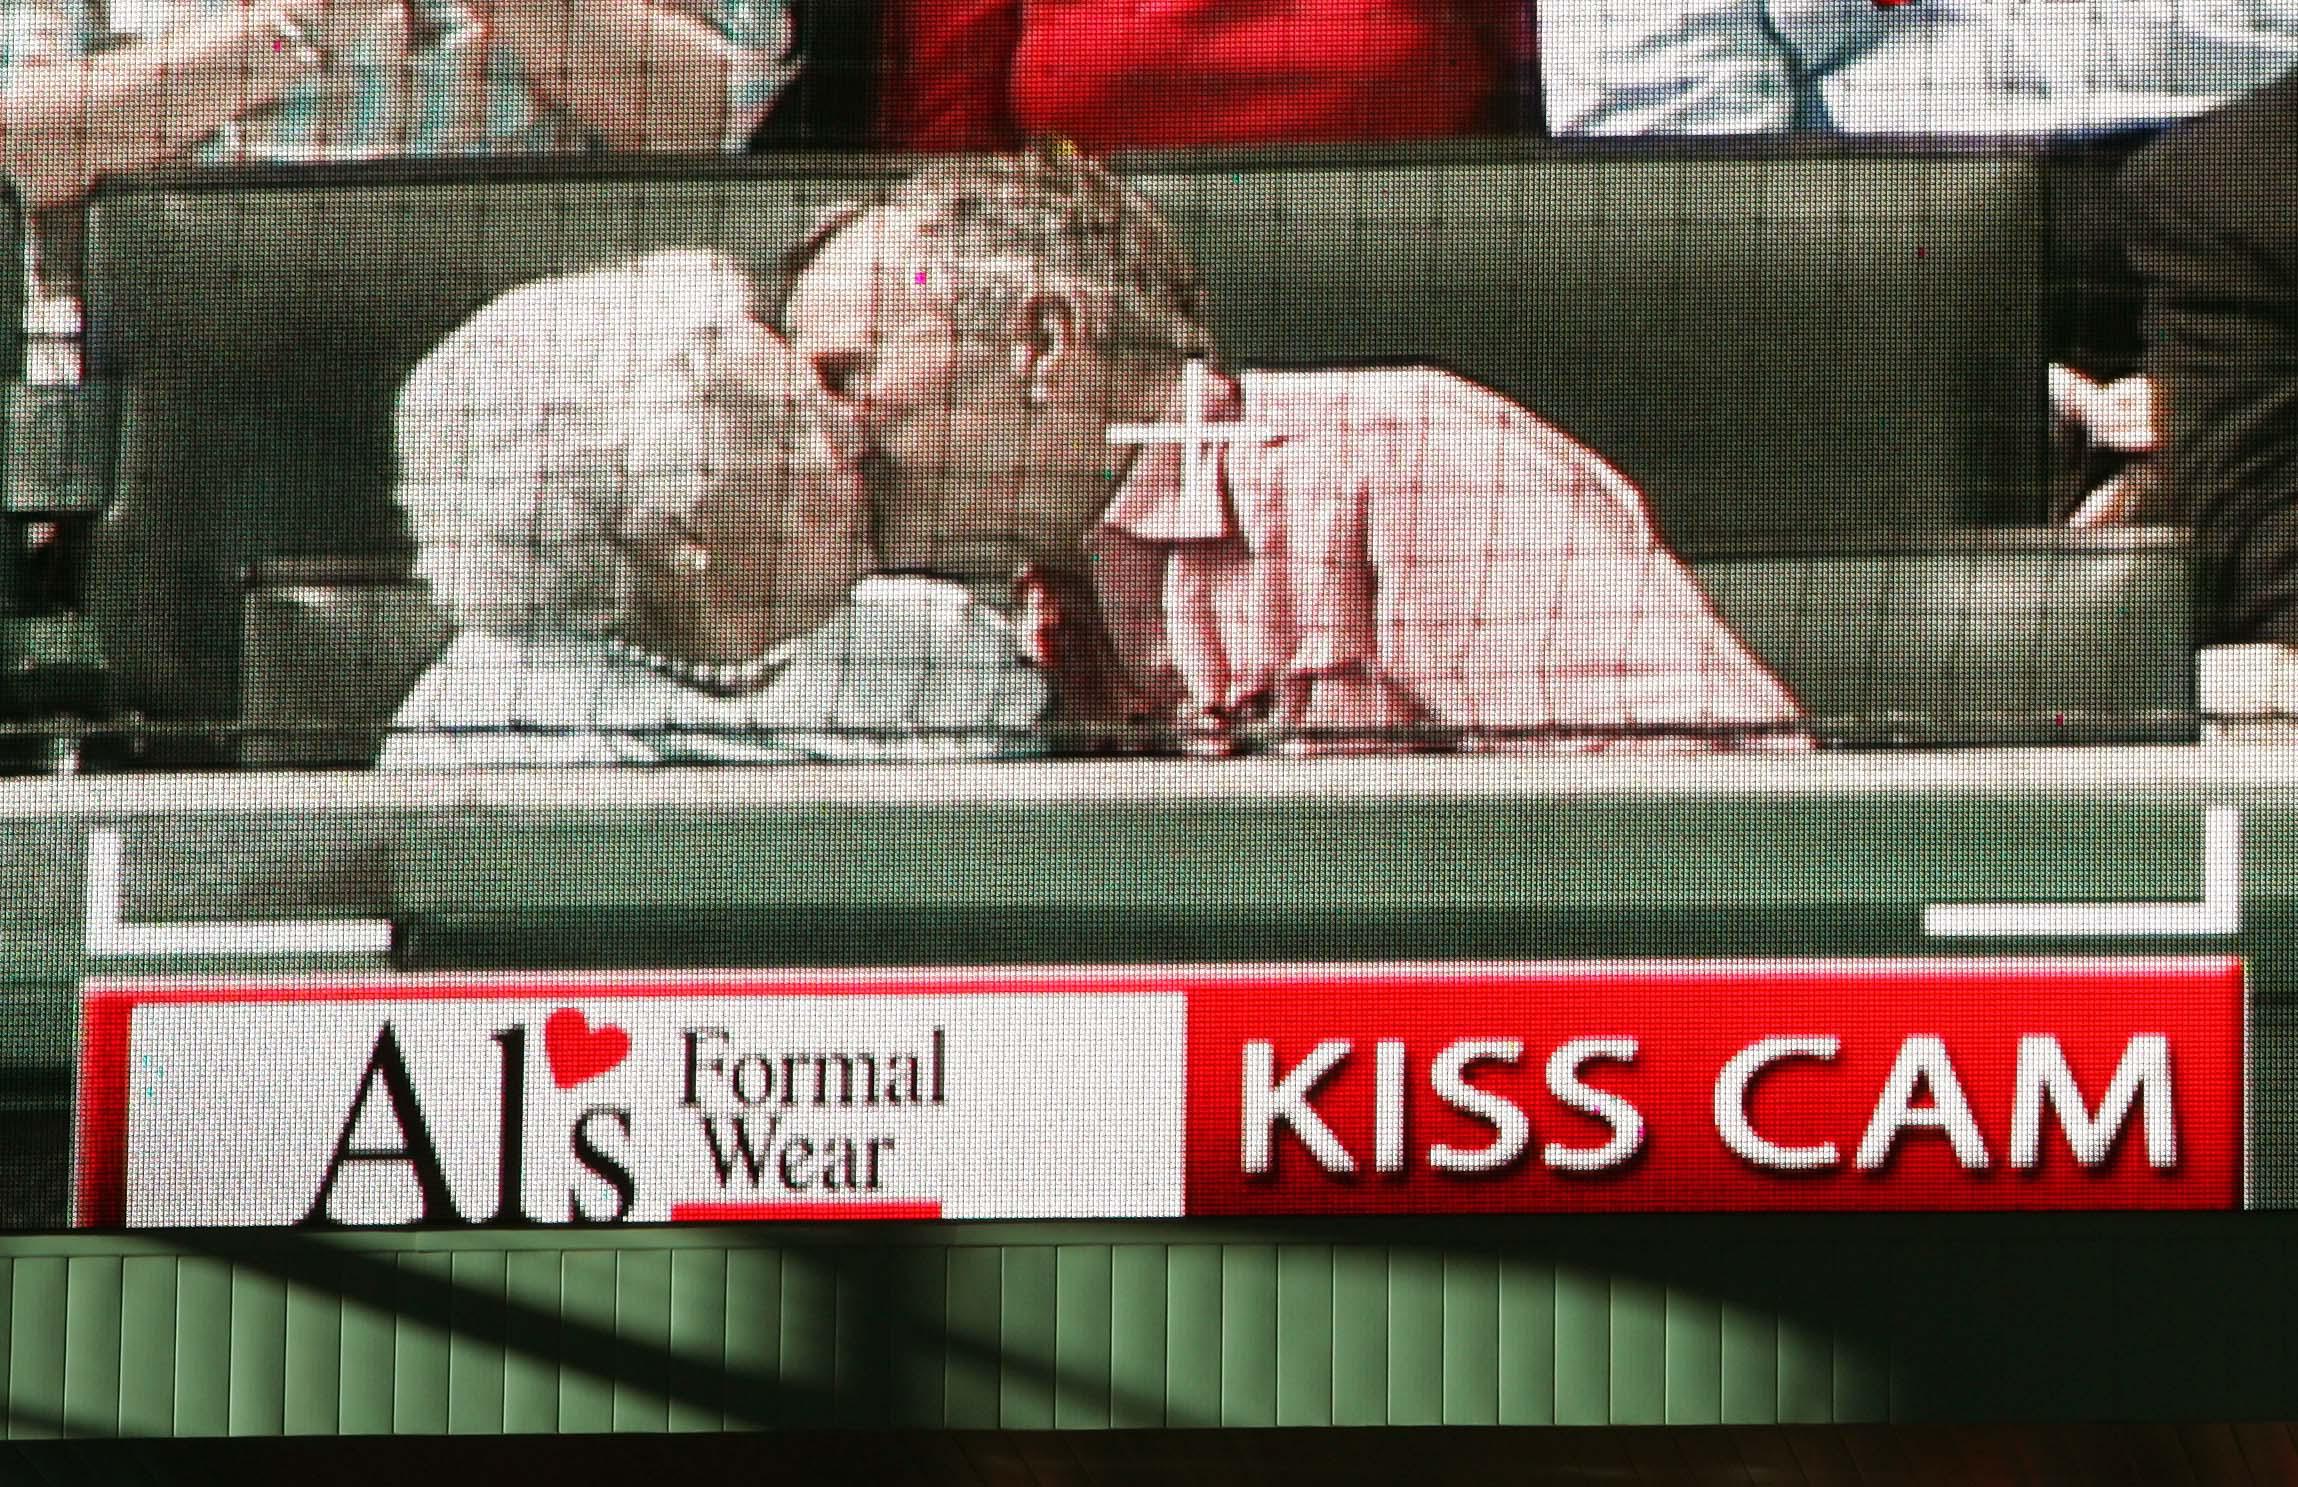 Former President George Bush and his wife, Barbara, caught on the Houston Astros kiss cam, Oct. 16, 2005.  